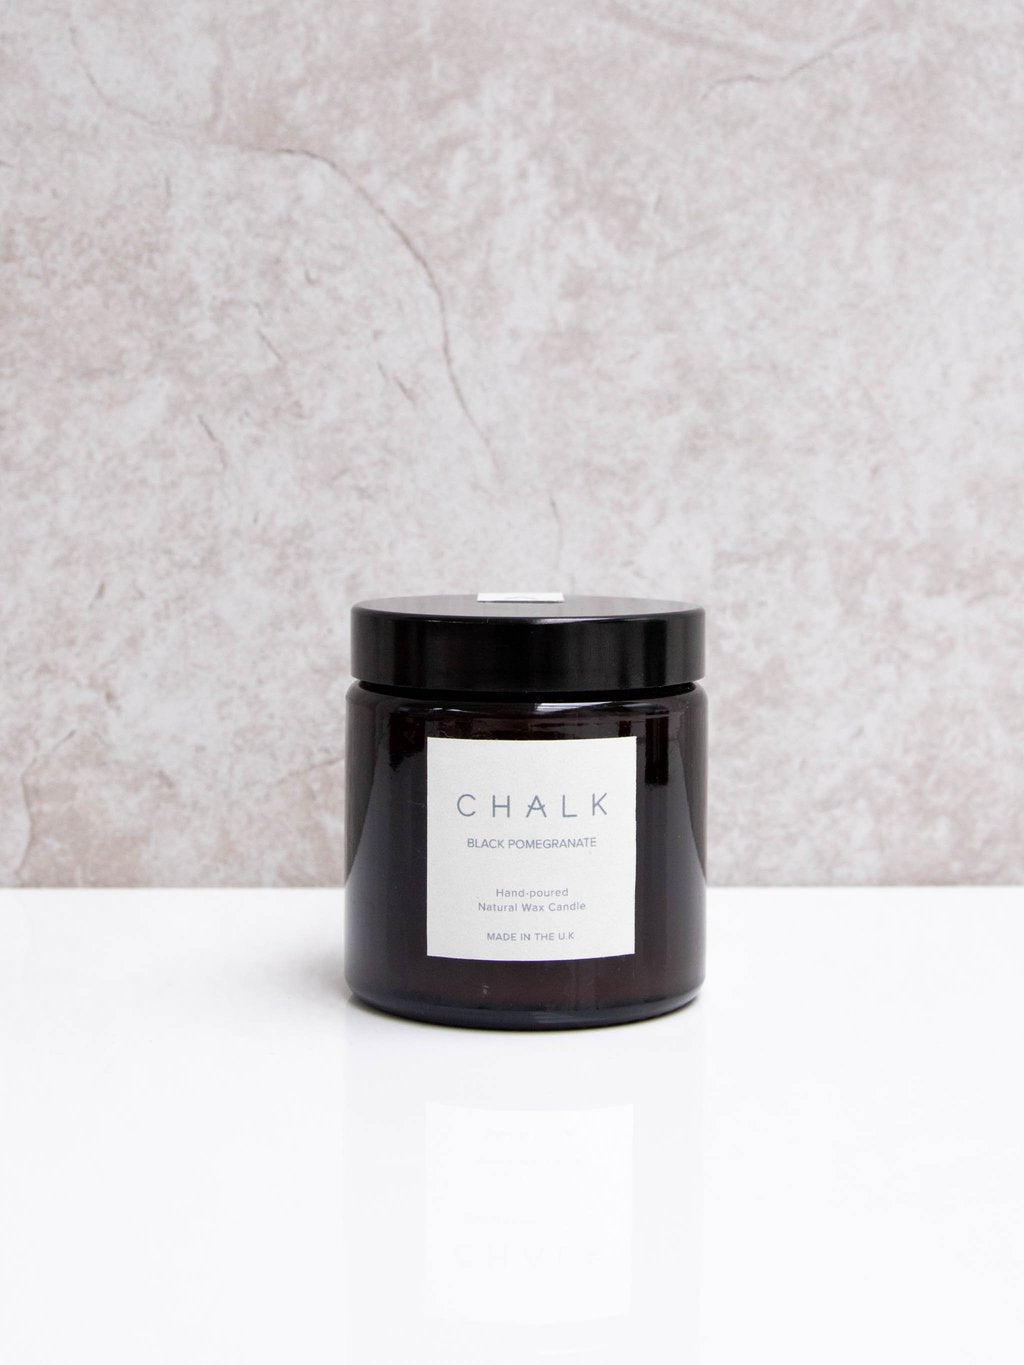 Chalk UK Hand Poured Natural Wax Candle - Black Pomegranate